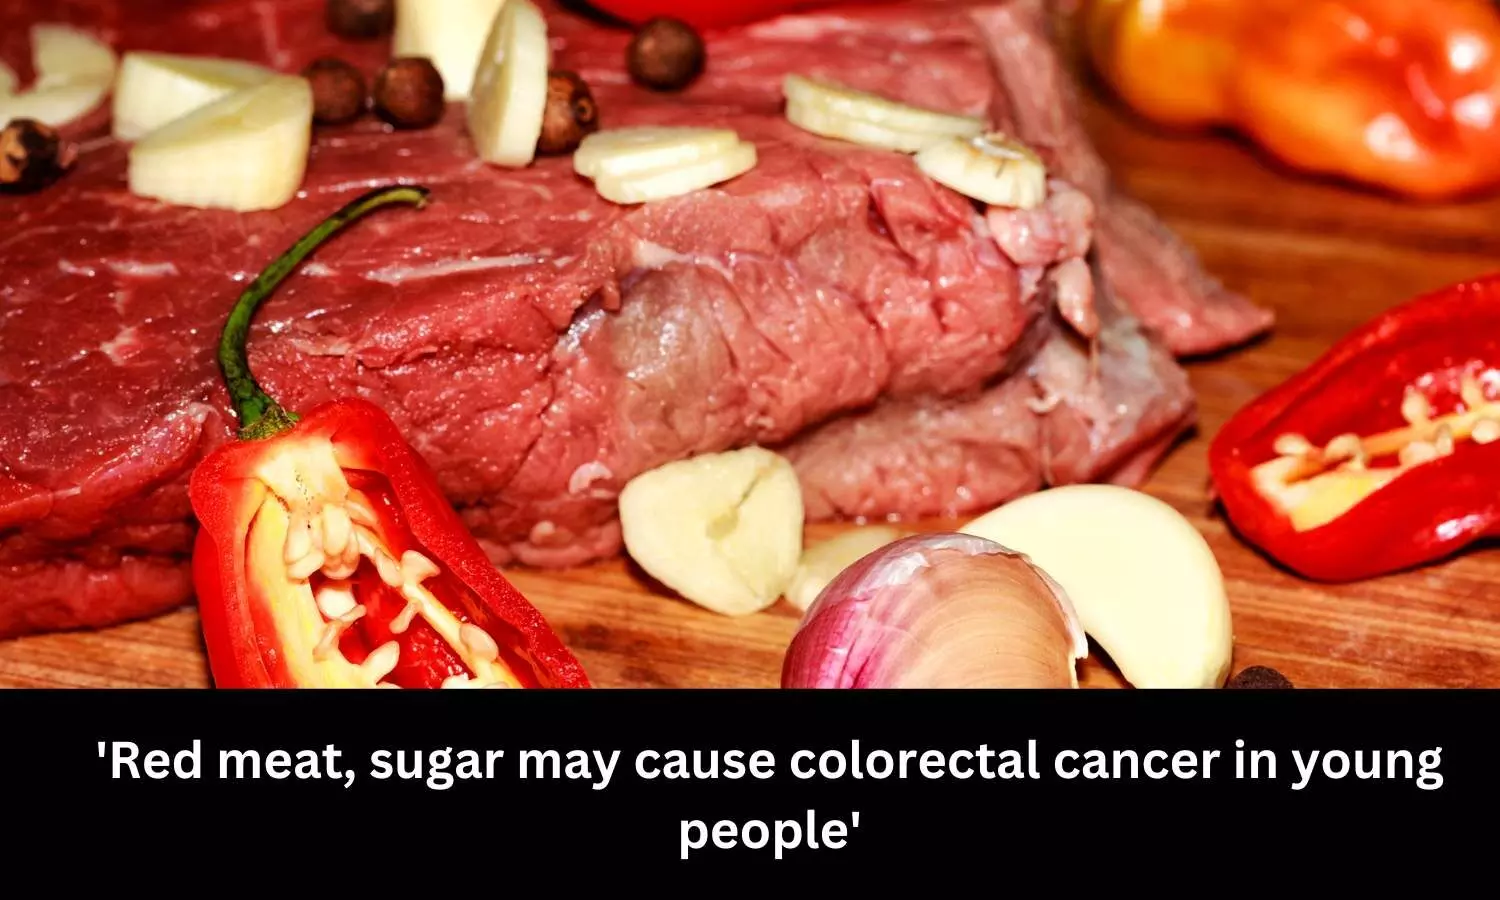 Red meat, sugar may cause colorectal cancer in young people